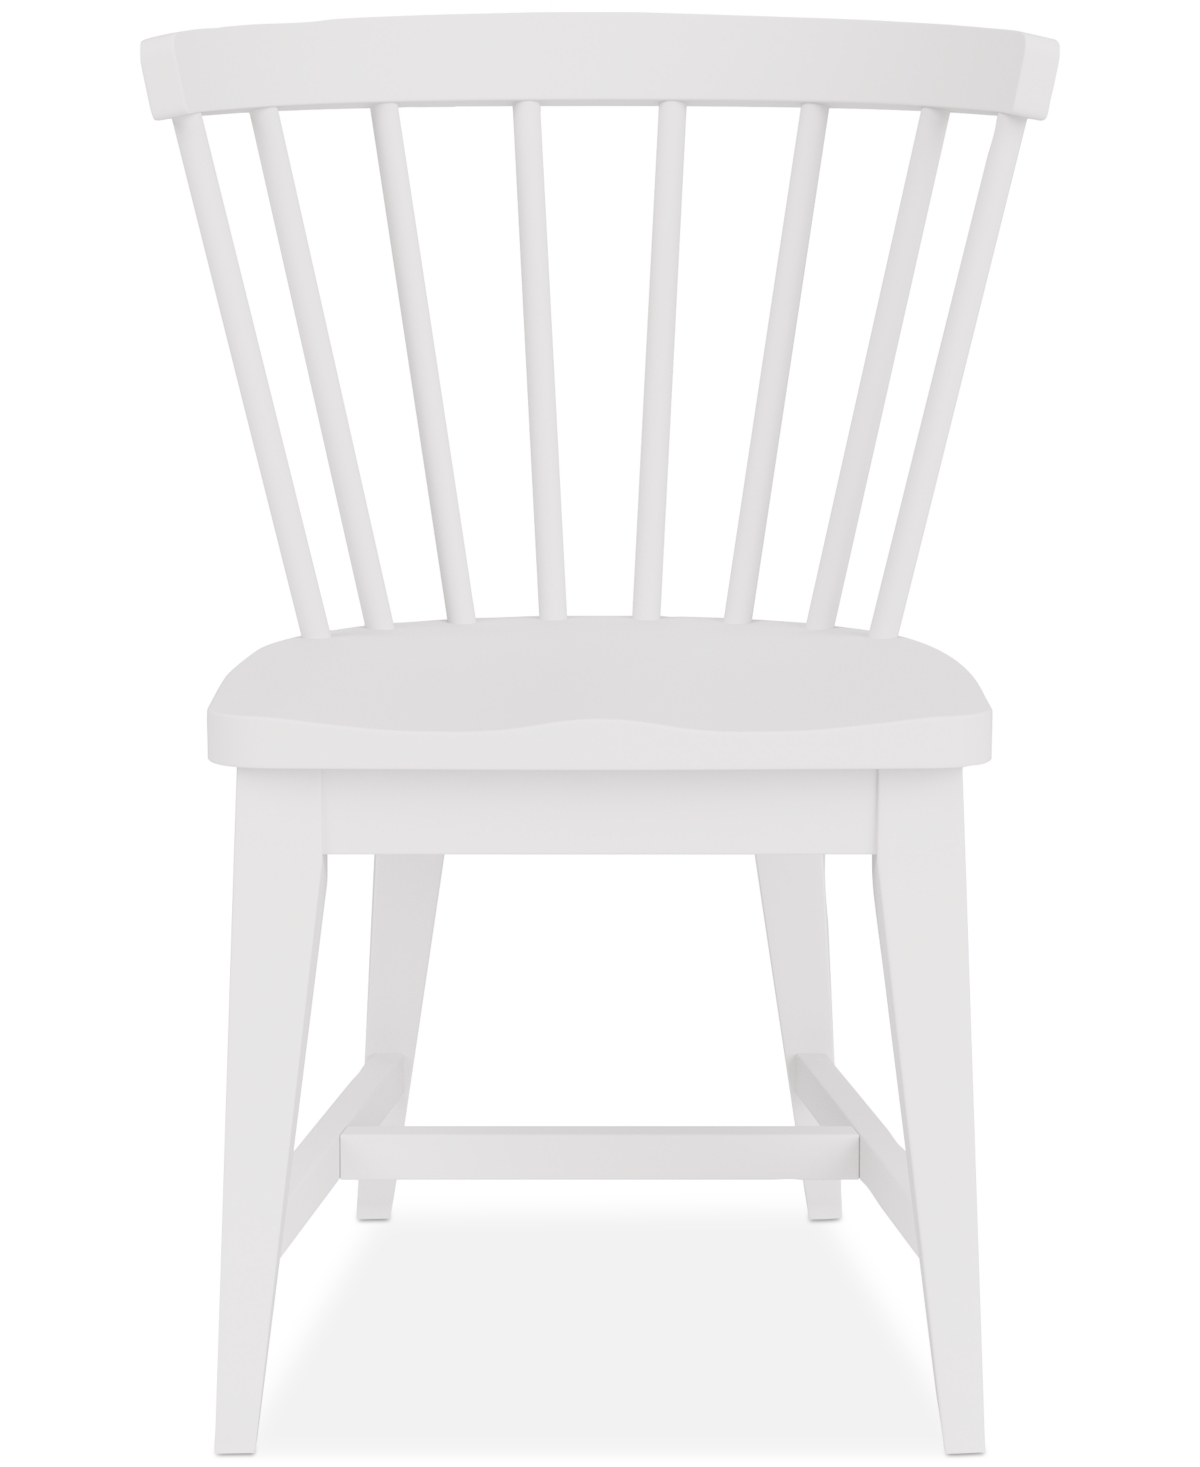 Shop Macy's Catriona 6 Pc. Wood Side Chair Set In White